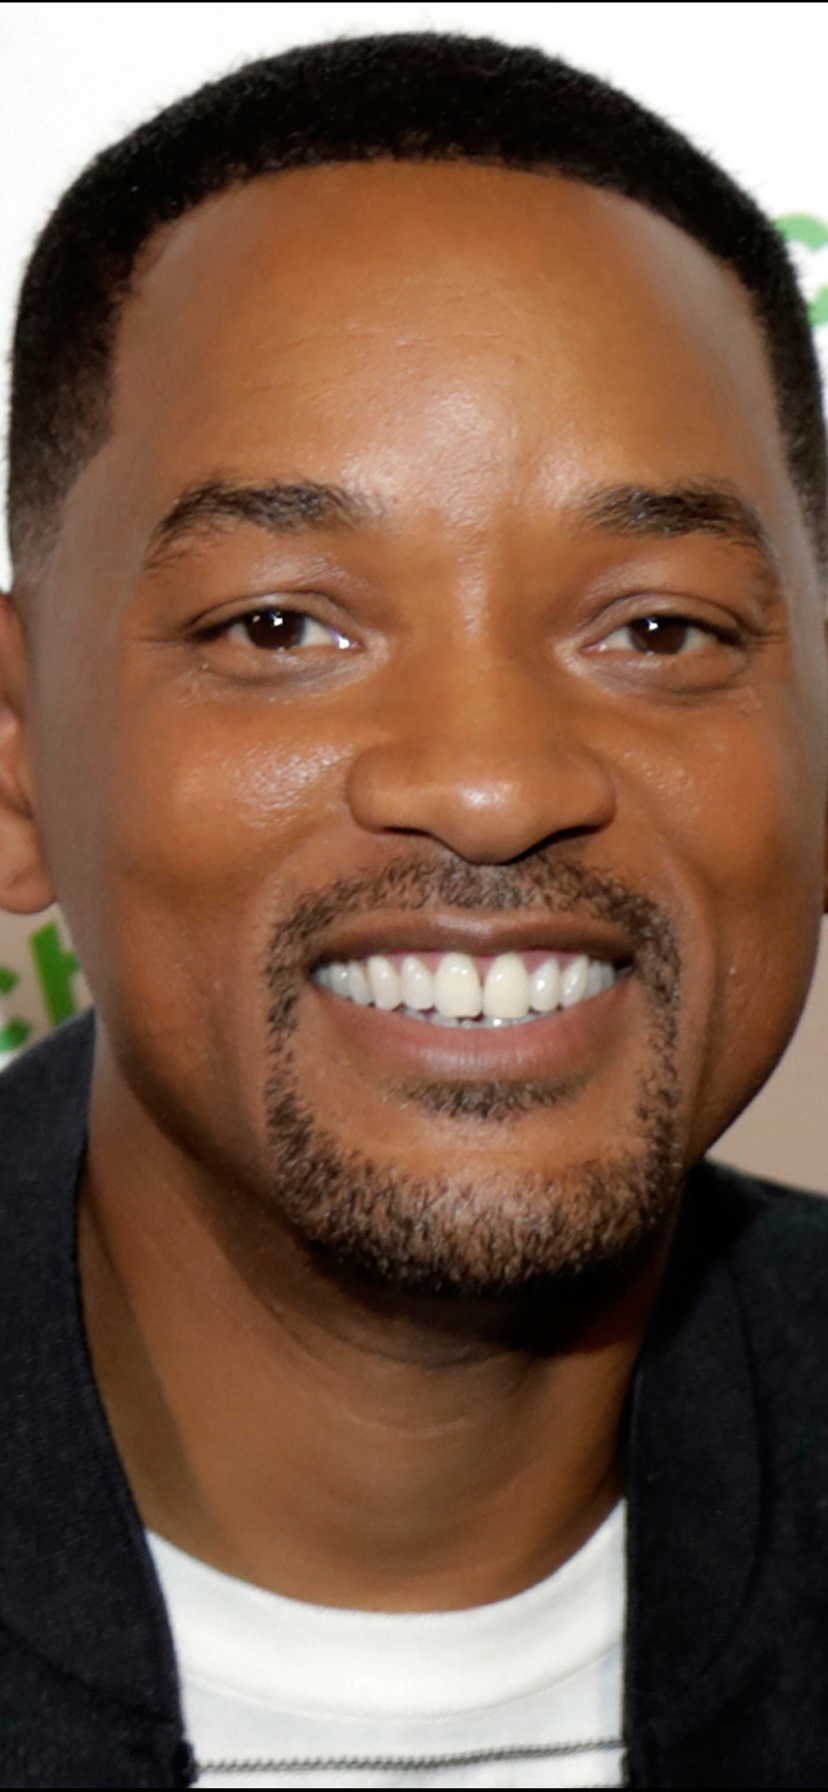 WILL SMITH: BIOGRAPHY, EARLY LIFE, MOVIES ACTED, STUNNING INVENTS, and AWARDS